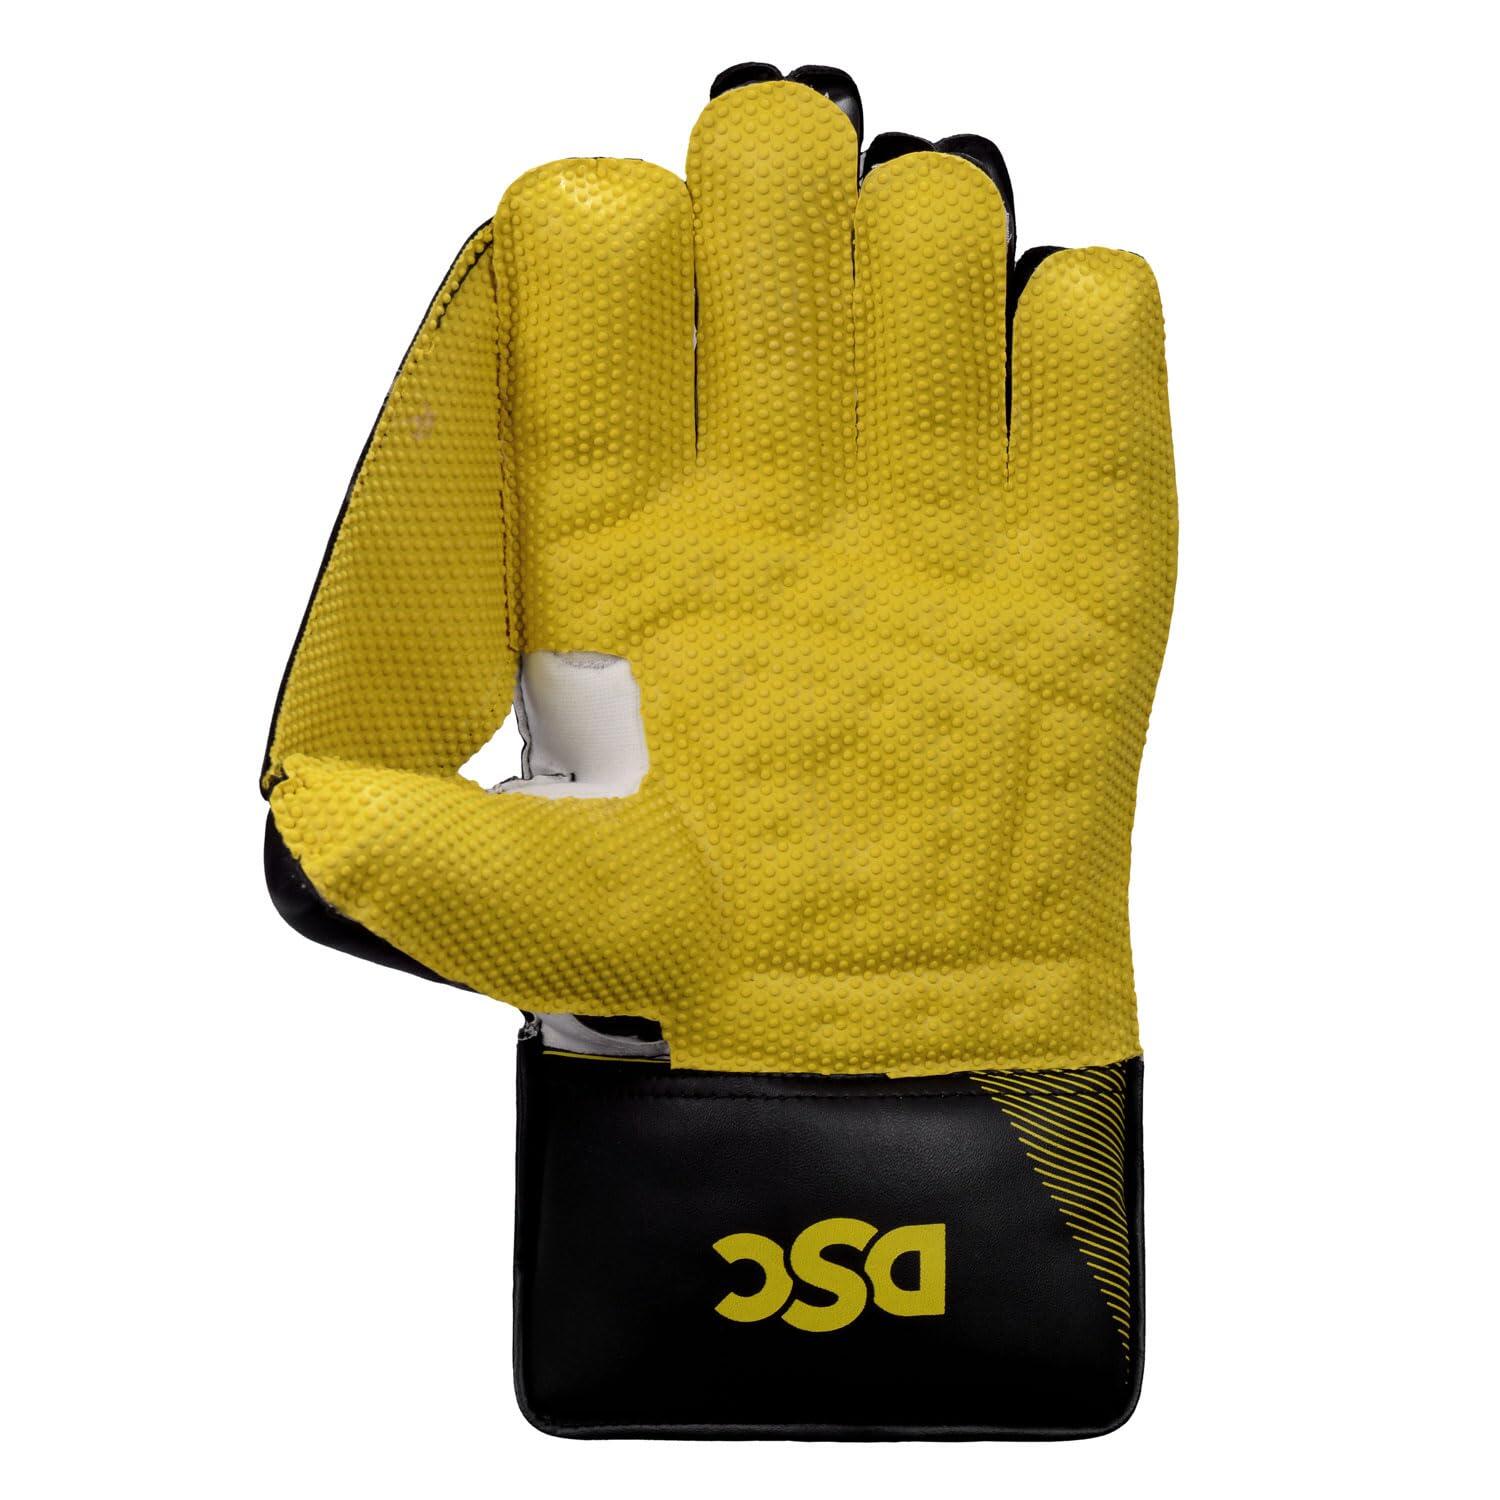 DSC Condor Ruffle Cricket Wicket Keeping Gloves | Material- Leather Ruffle 4/5